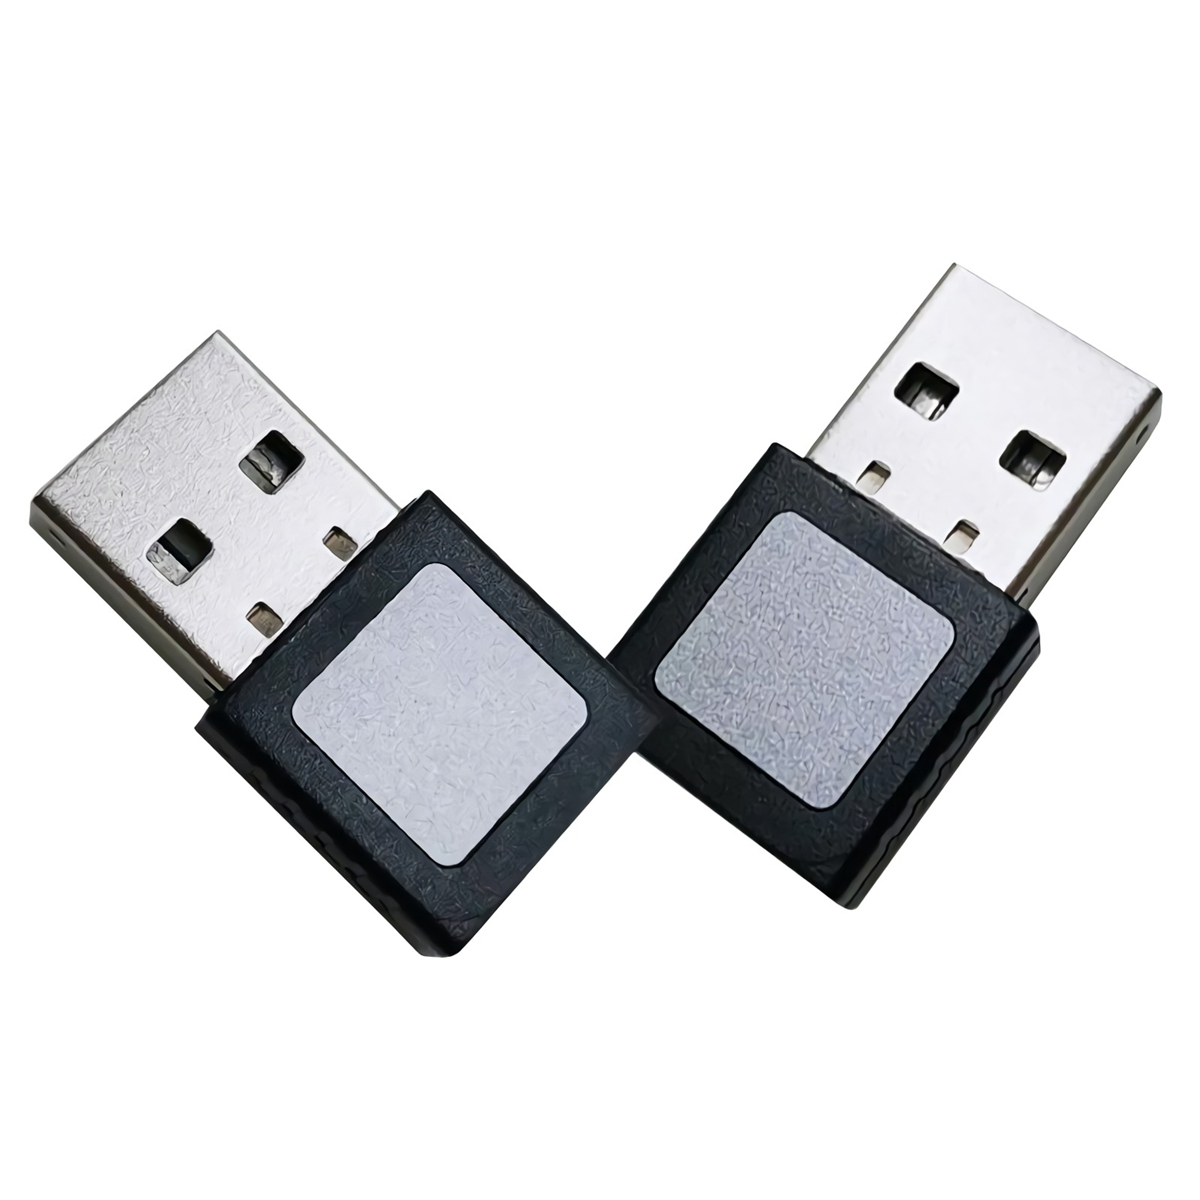 Find USB Fingerprint Recognition Logger Mini USB2 0 Smart ID Fingerprint Reader Fingerprint Unlock 360 Full Angle Identification Adapter For Windows 10 32/64Bit Password Free Fingerprint Encryption Login Lock for Sale on Gipsybee.com with cryptocurrencies